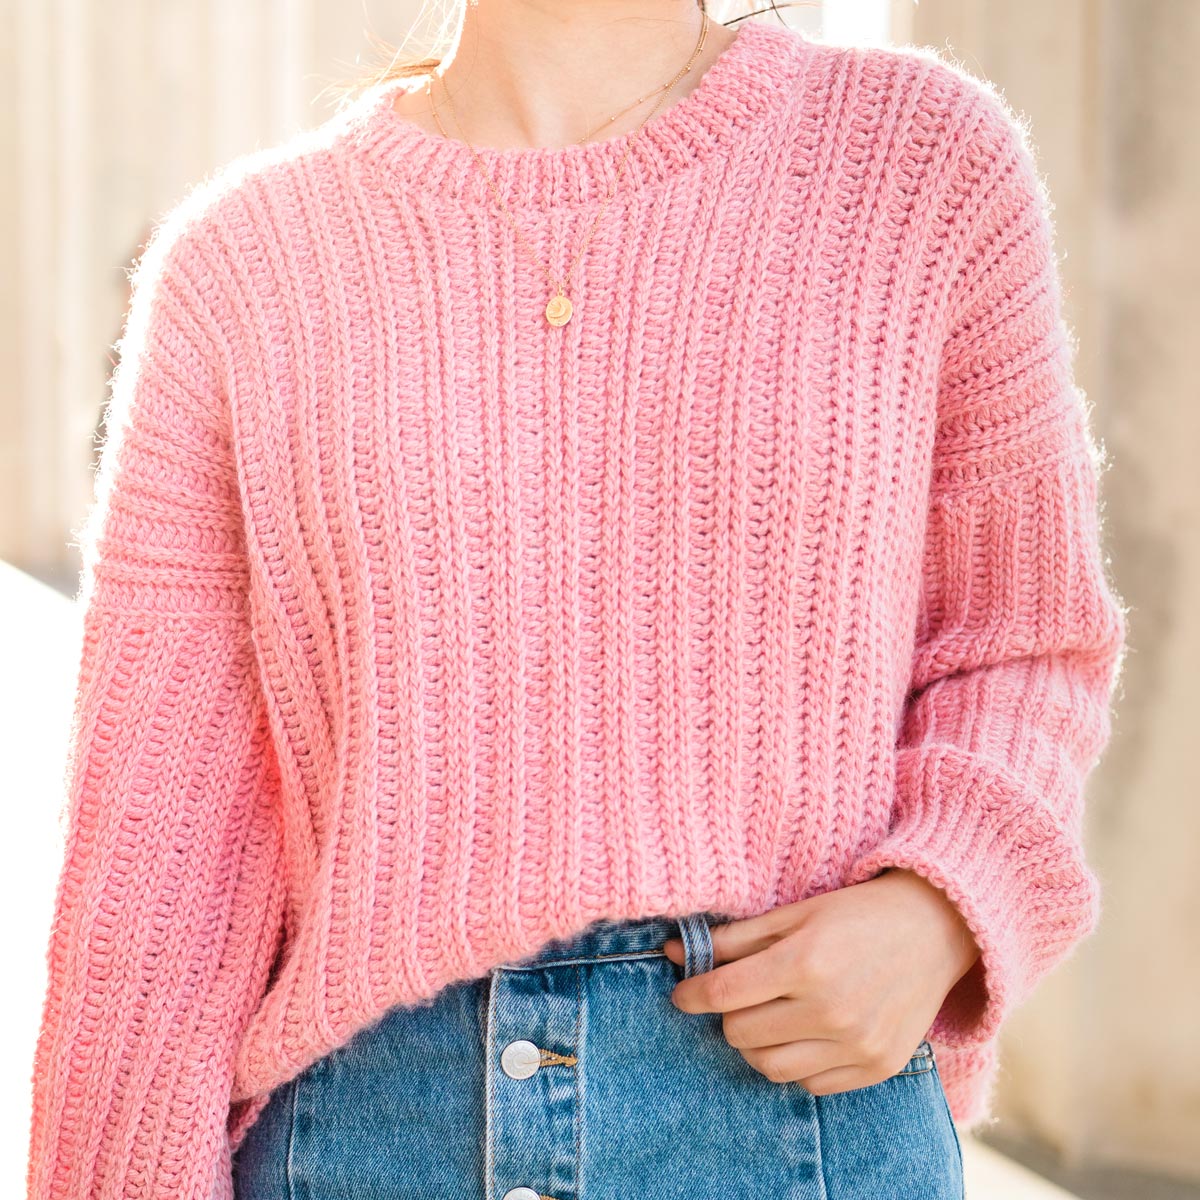 Can You Crochet A Sweater? 